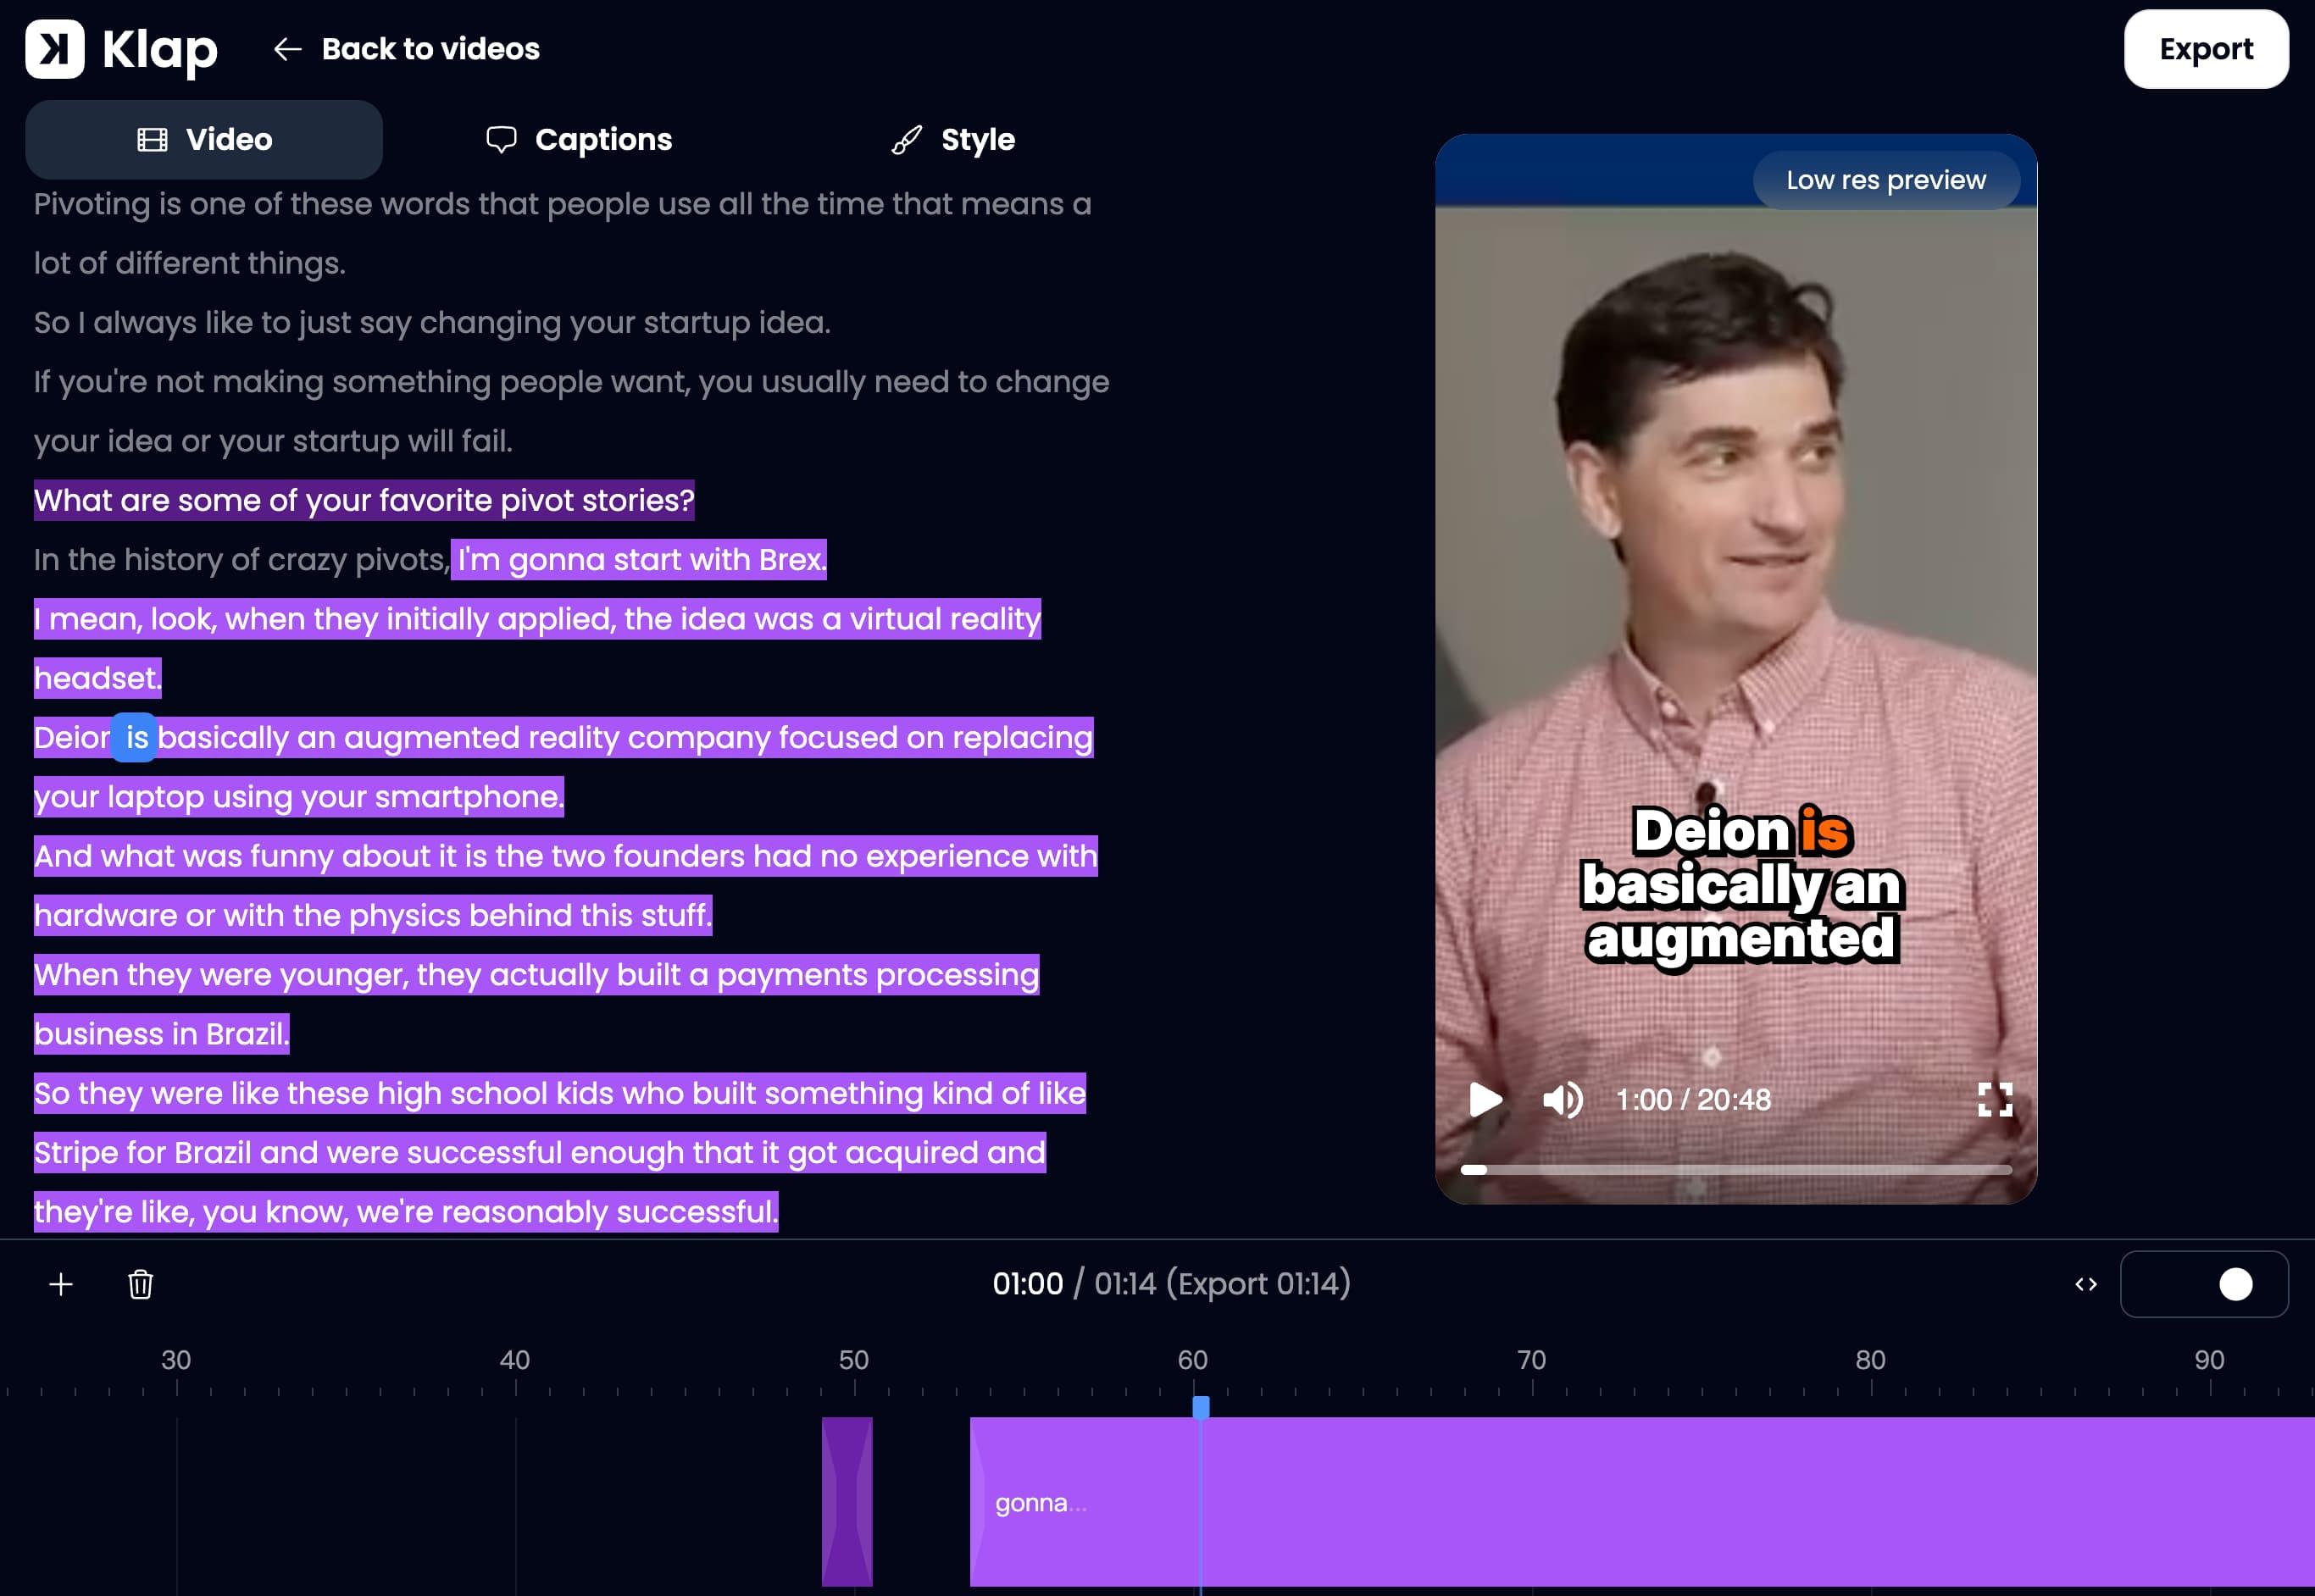 AI extract the best topics from the video and edits them into viral short clips